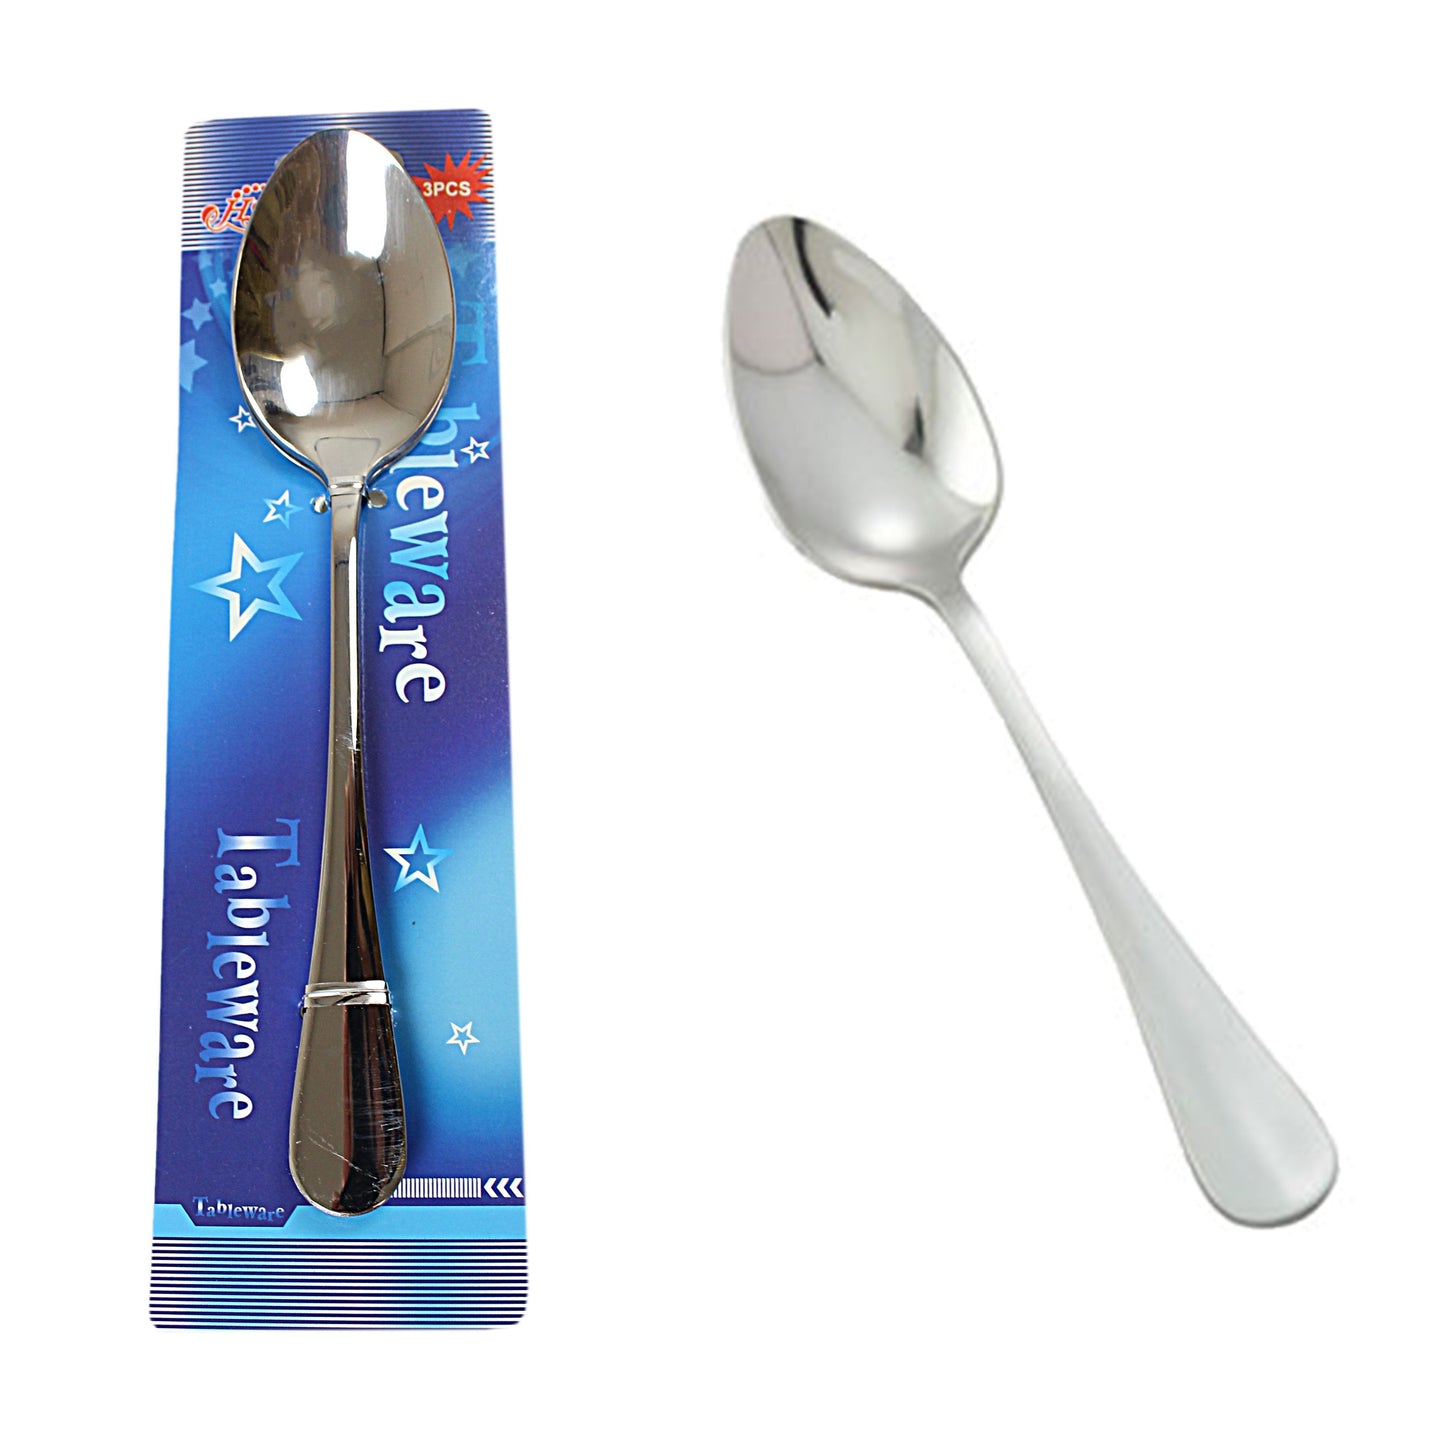 Stainless Steel Table Spoons 18.3 cm Pack of 3 0795 (Large Letter Rate)